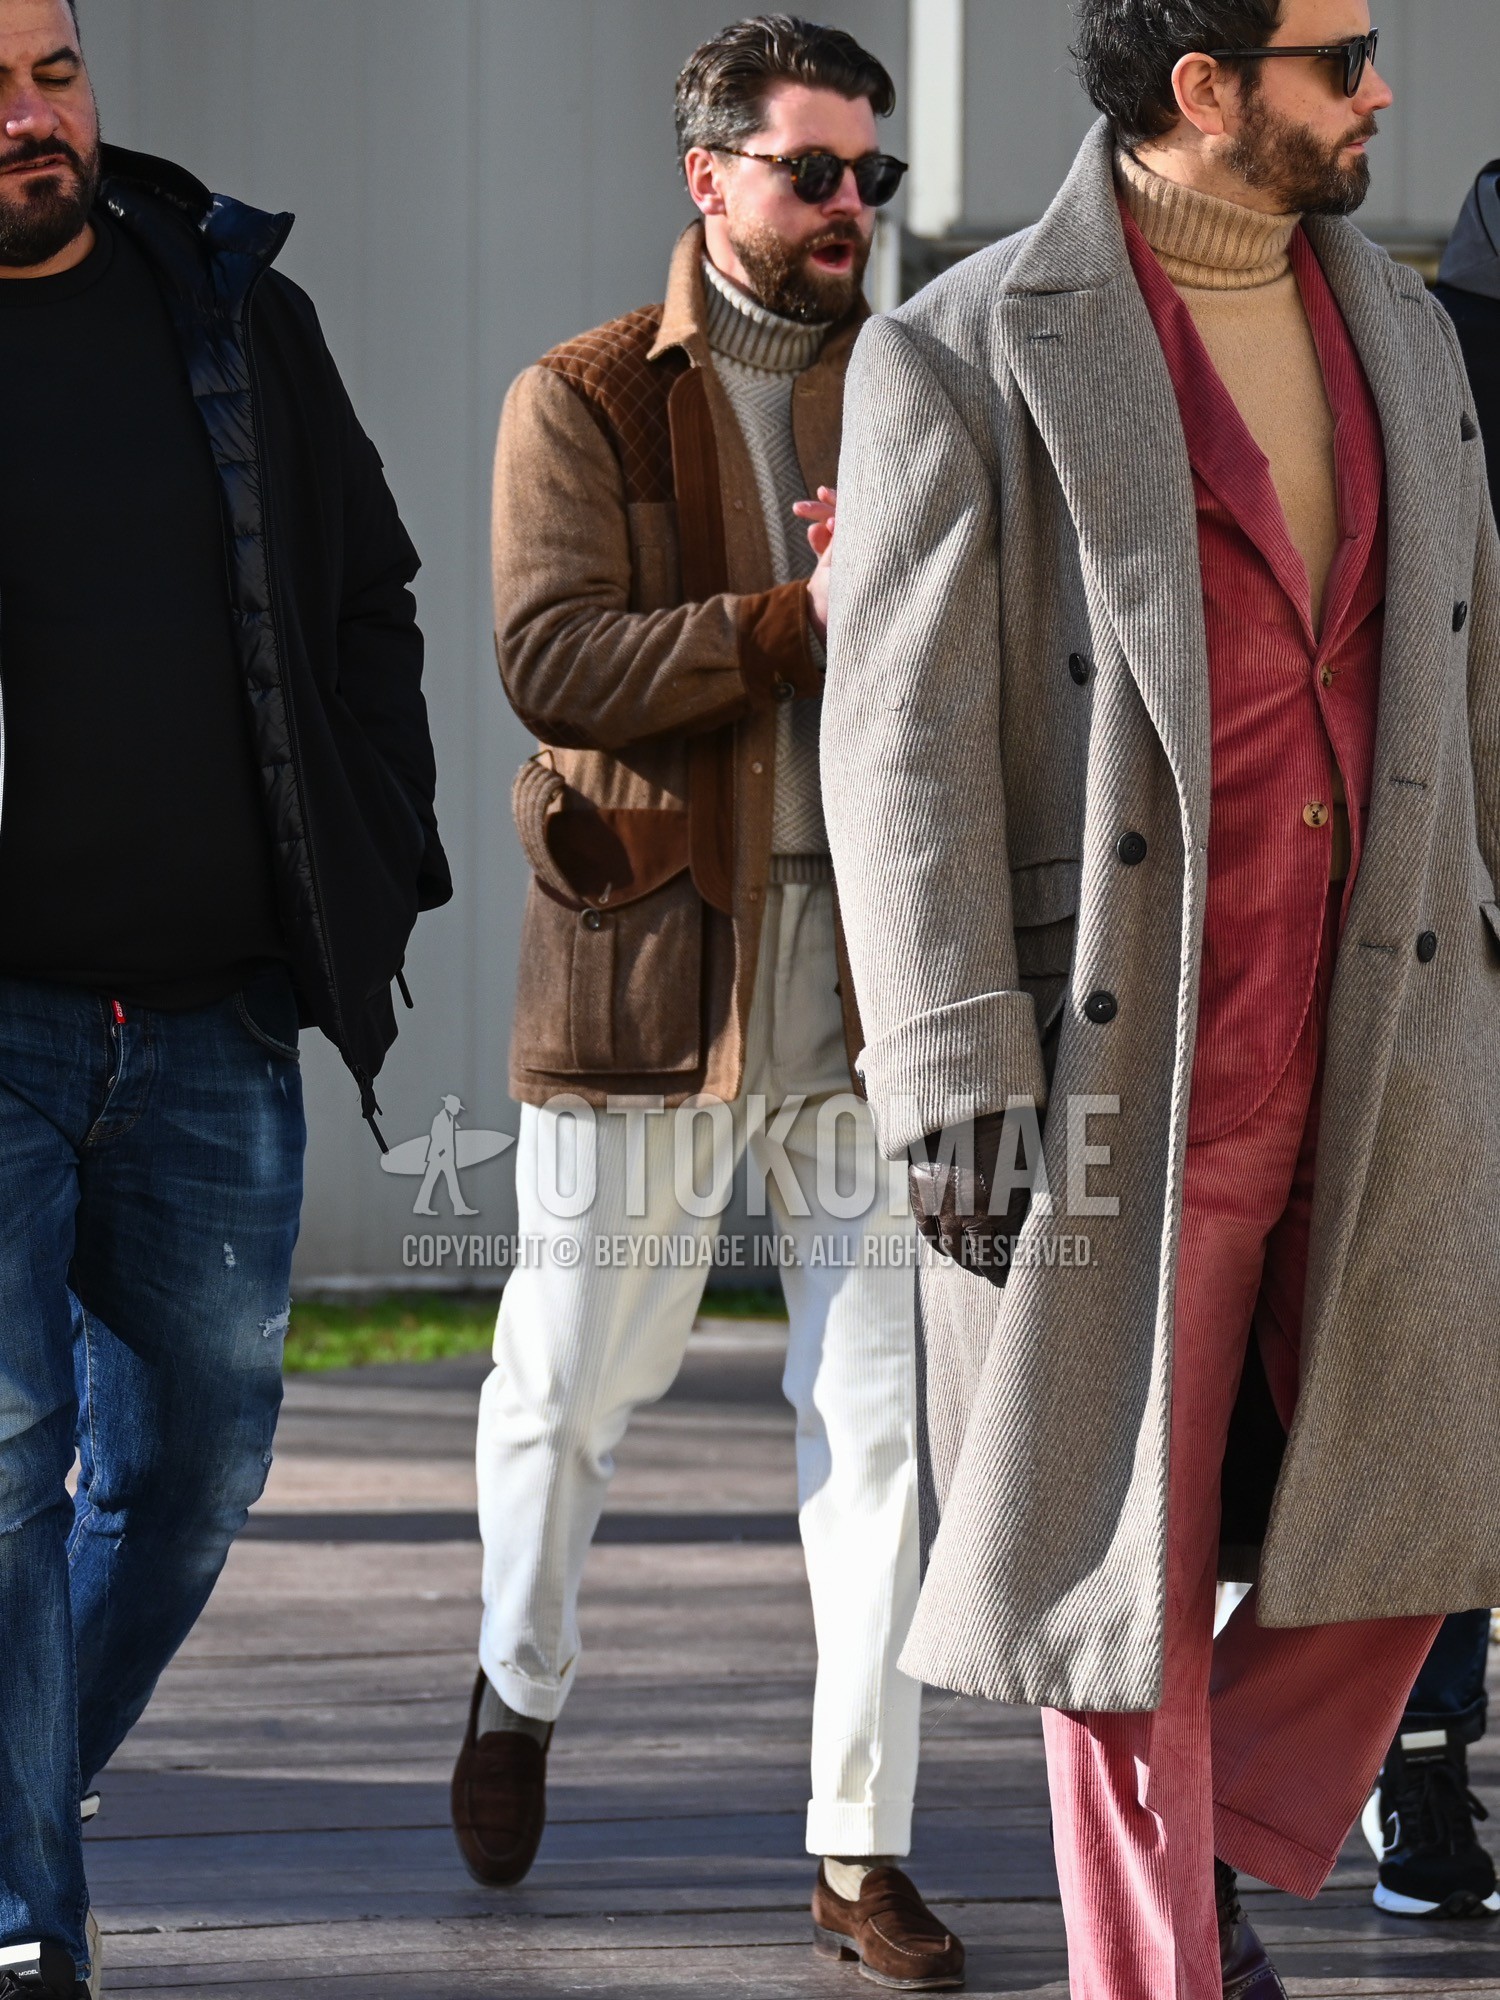 Men's autumn winter outfit with brown tortoiseshell sunglasses, brown beige plain military jacket, beige graphic turtleneck knit, white plain slacks, beige plain socks, brown coin loafers leather shoes, brown suede shoes leather shoes.